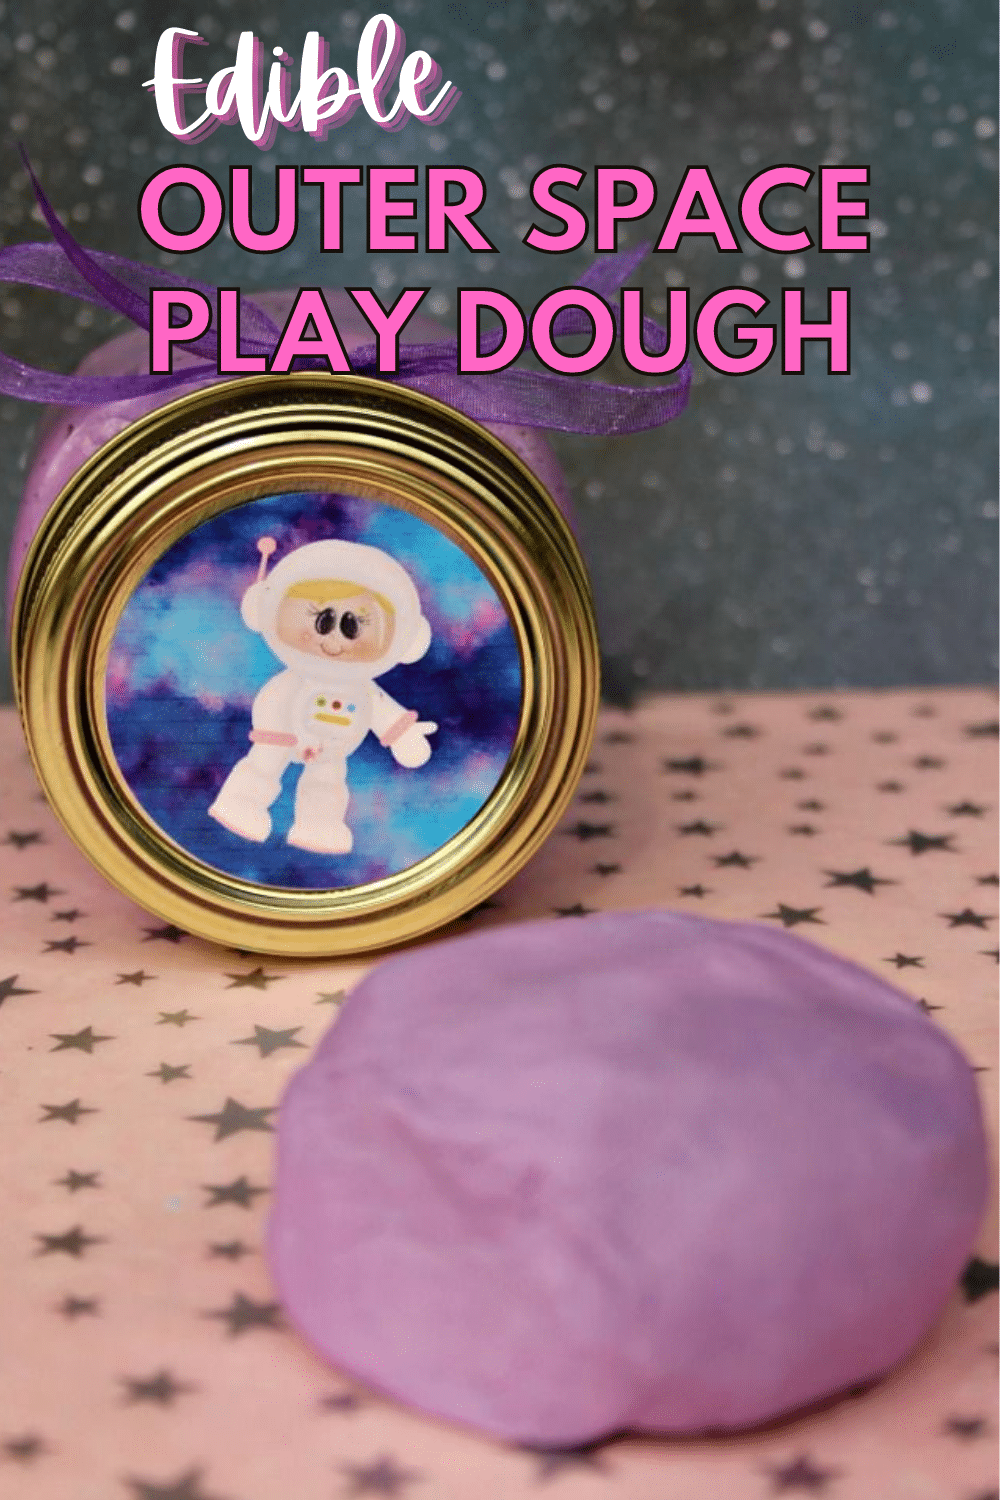 This Edible Outer Space Play Dough recipe is taste-safe and simple to make with only 2 or 3 ingredients. Young kids will love playing with this play dough. #playdough #edibleplaydough #activitesforkids via @wondermomwannab